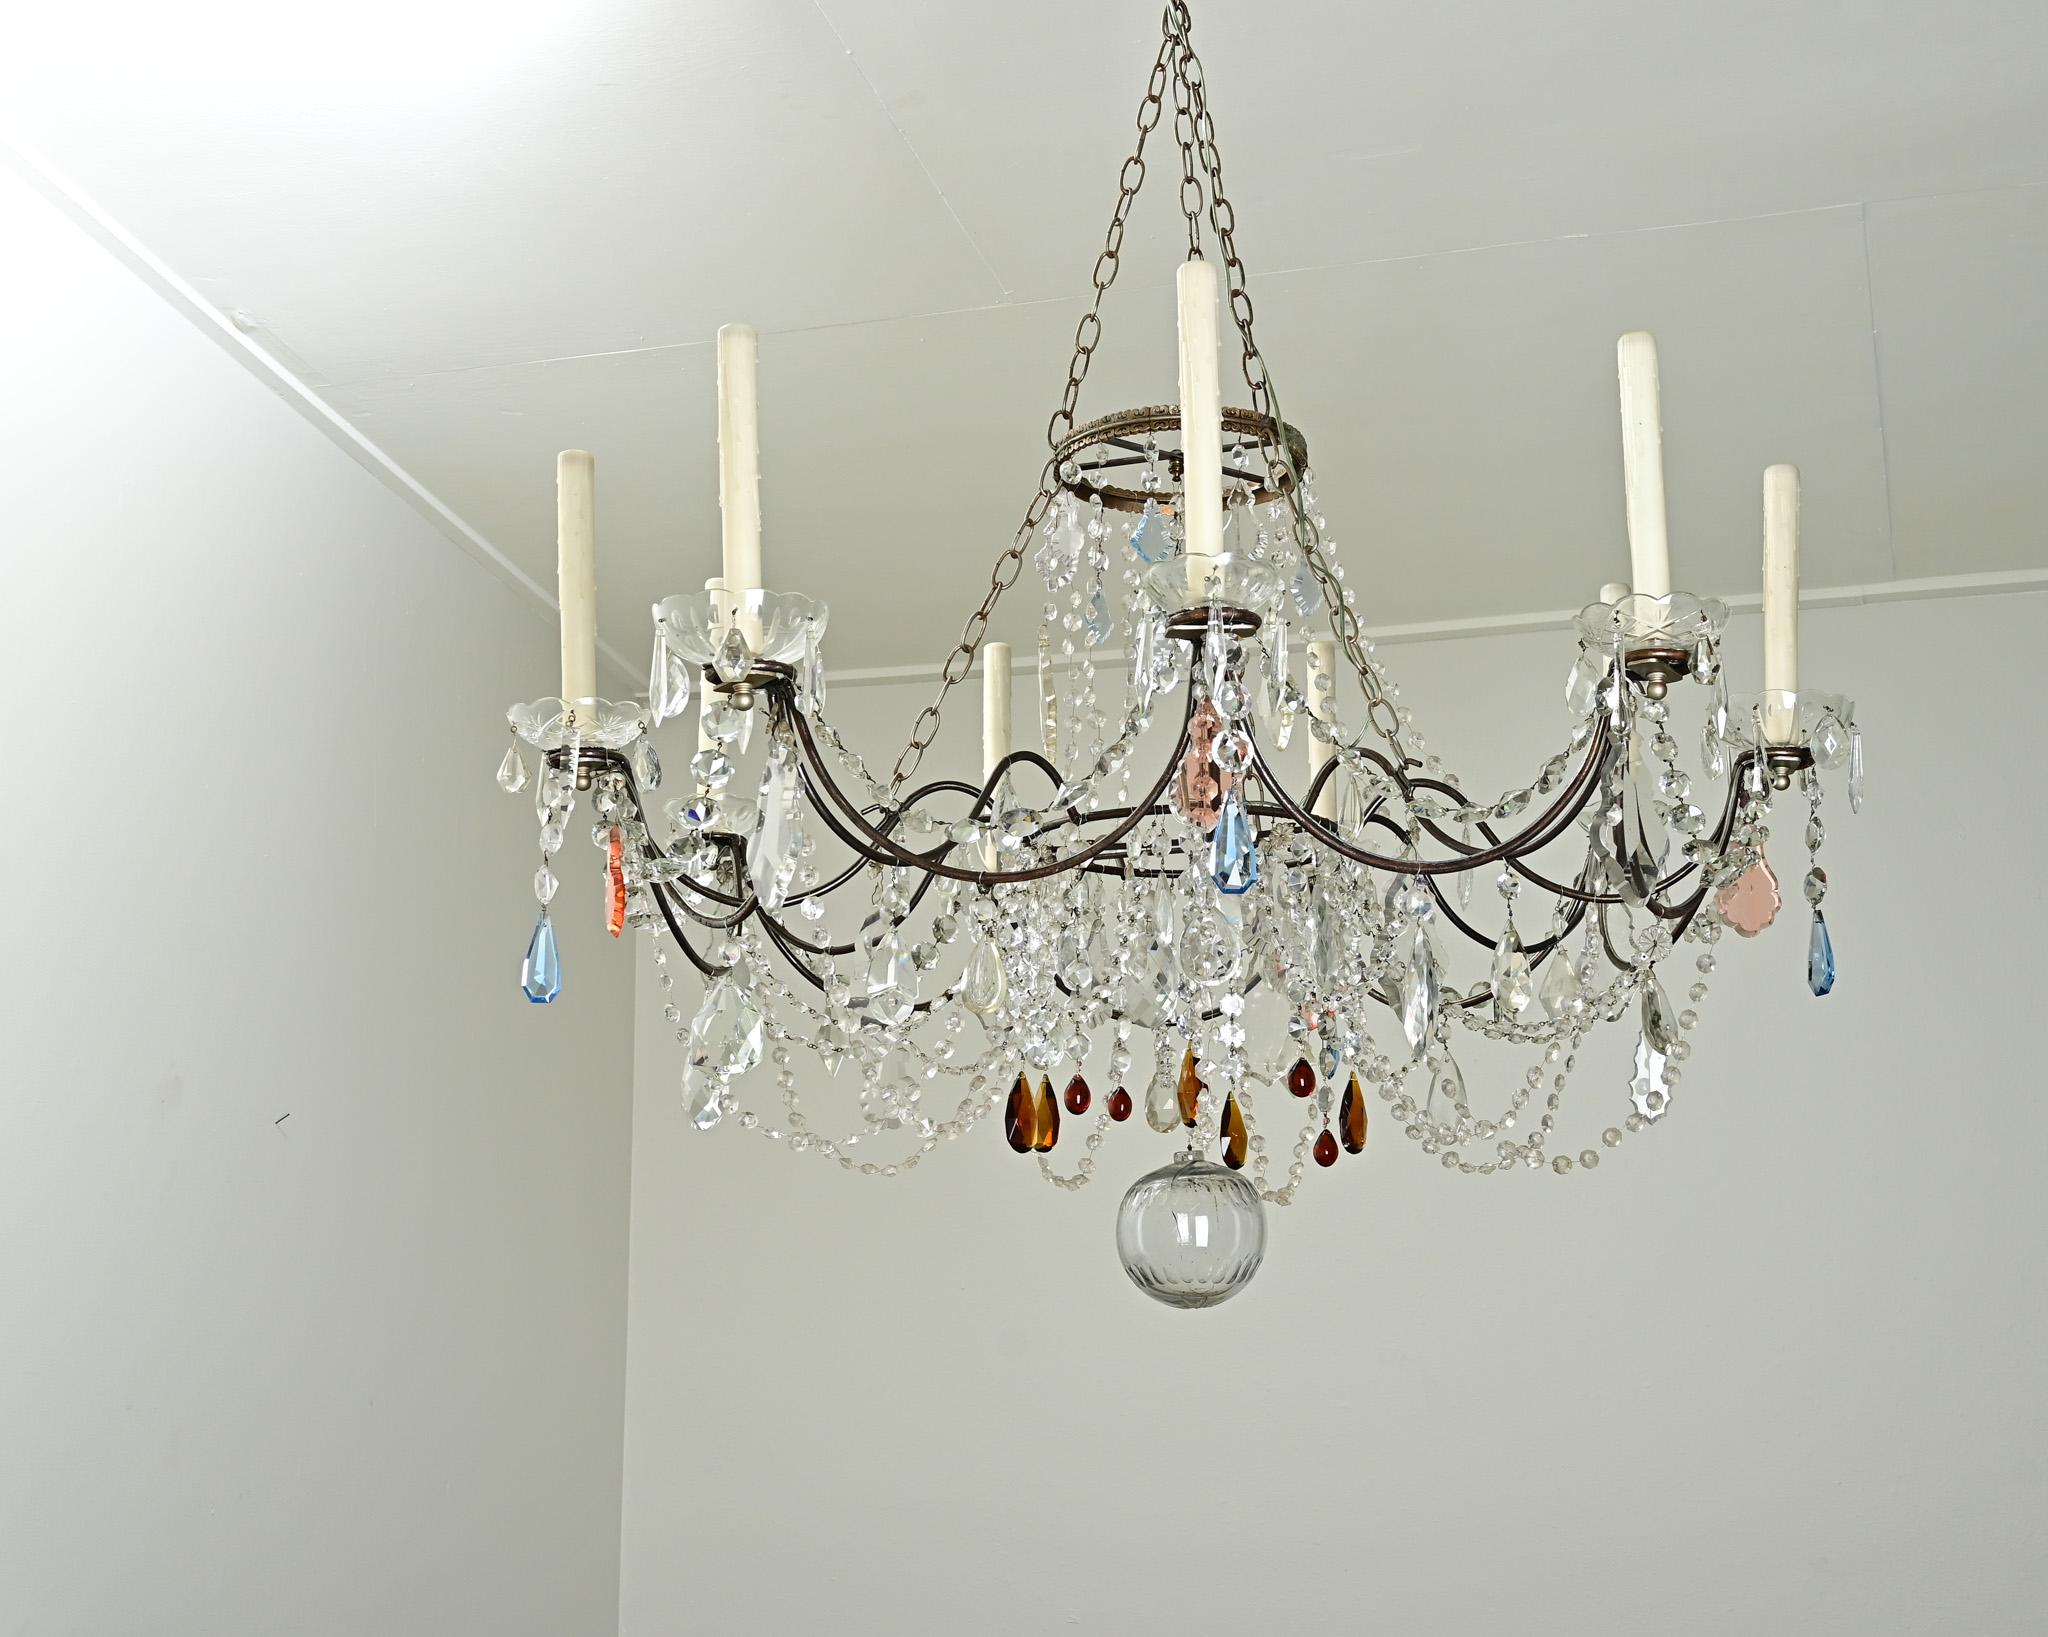 This massive chandelier was recently made by the owners of this shop. We had over 40 years of antique chandelier crystals in a box and other found metal parts that all came together to create this playful and whimsical light fixture. Each crystal